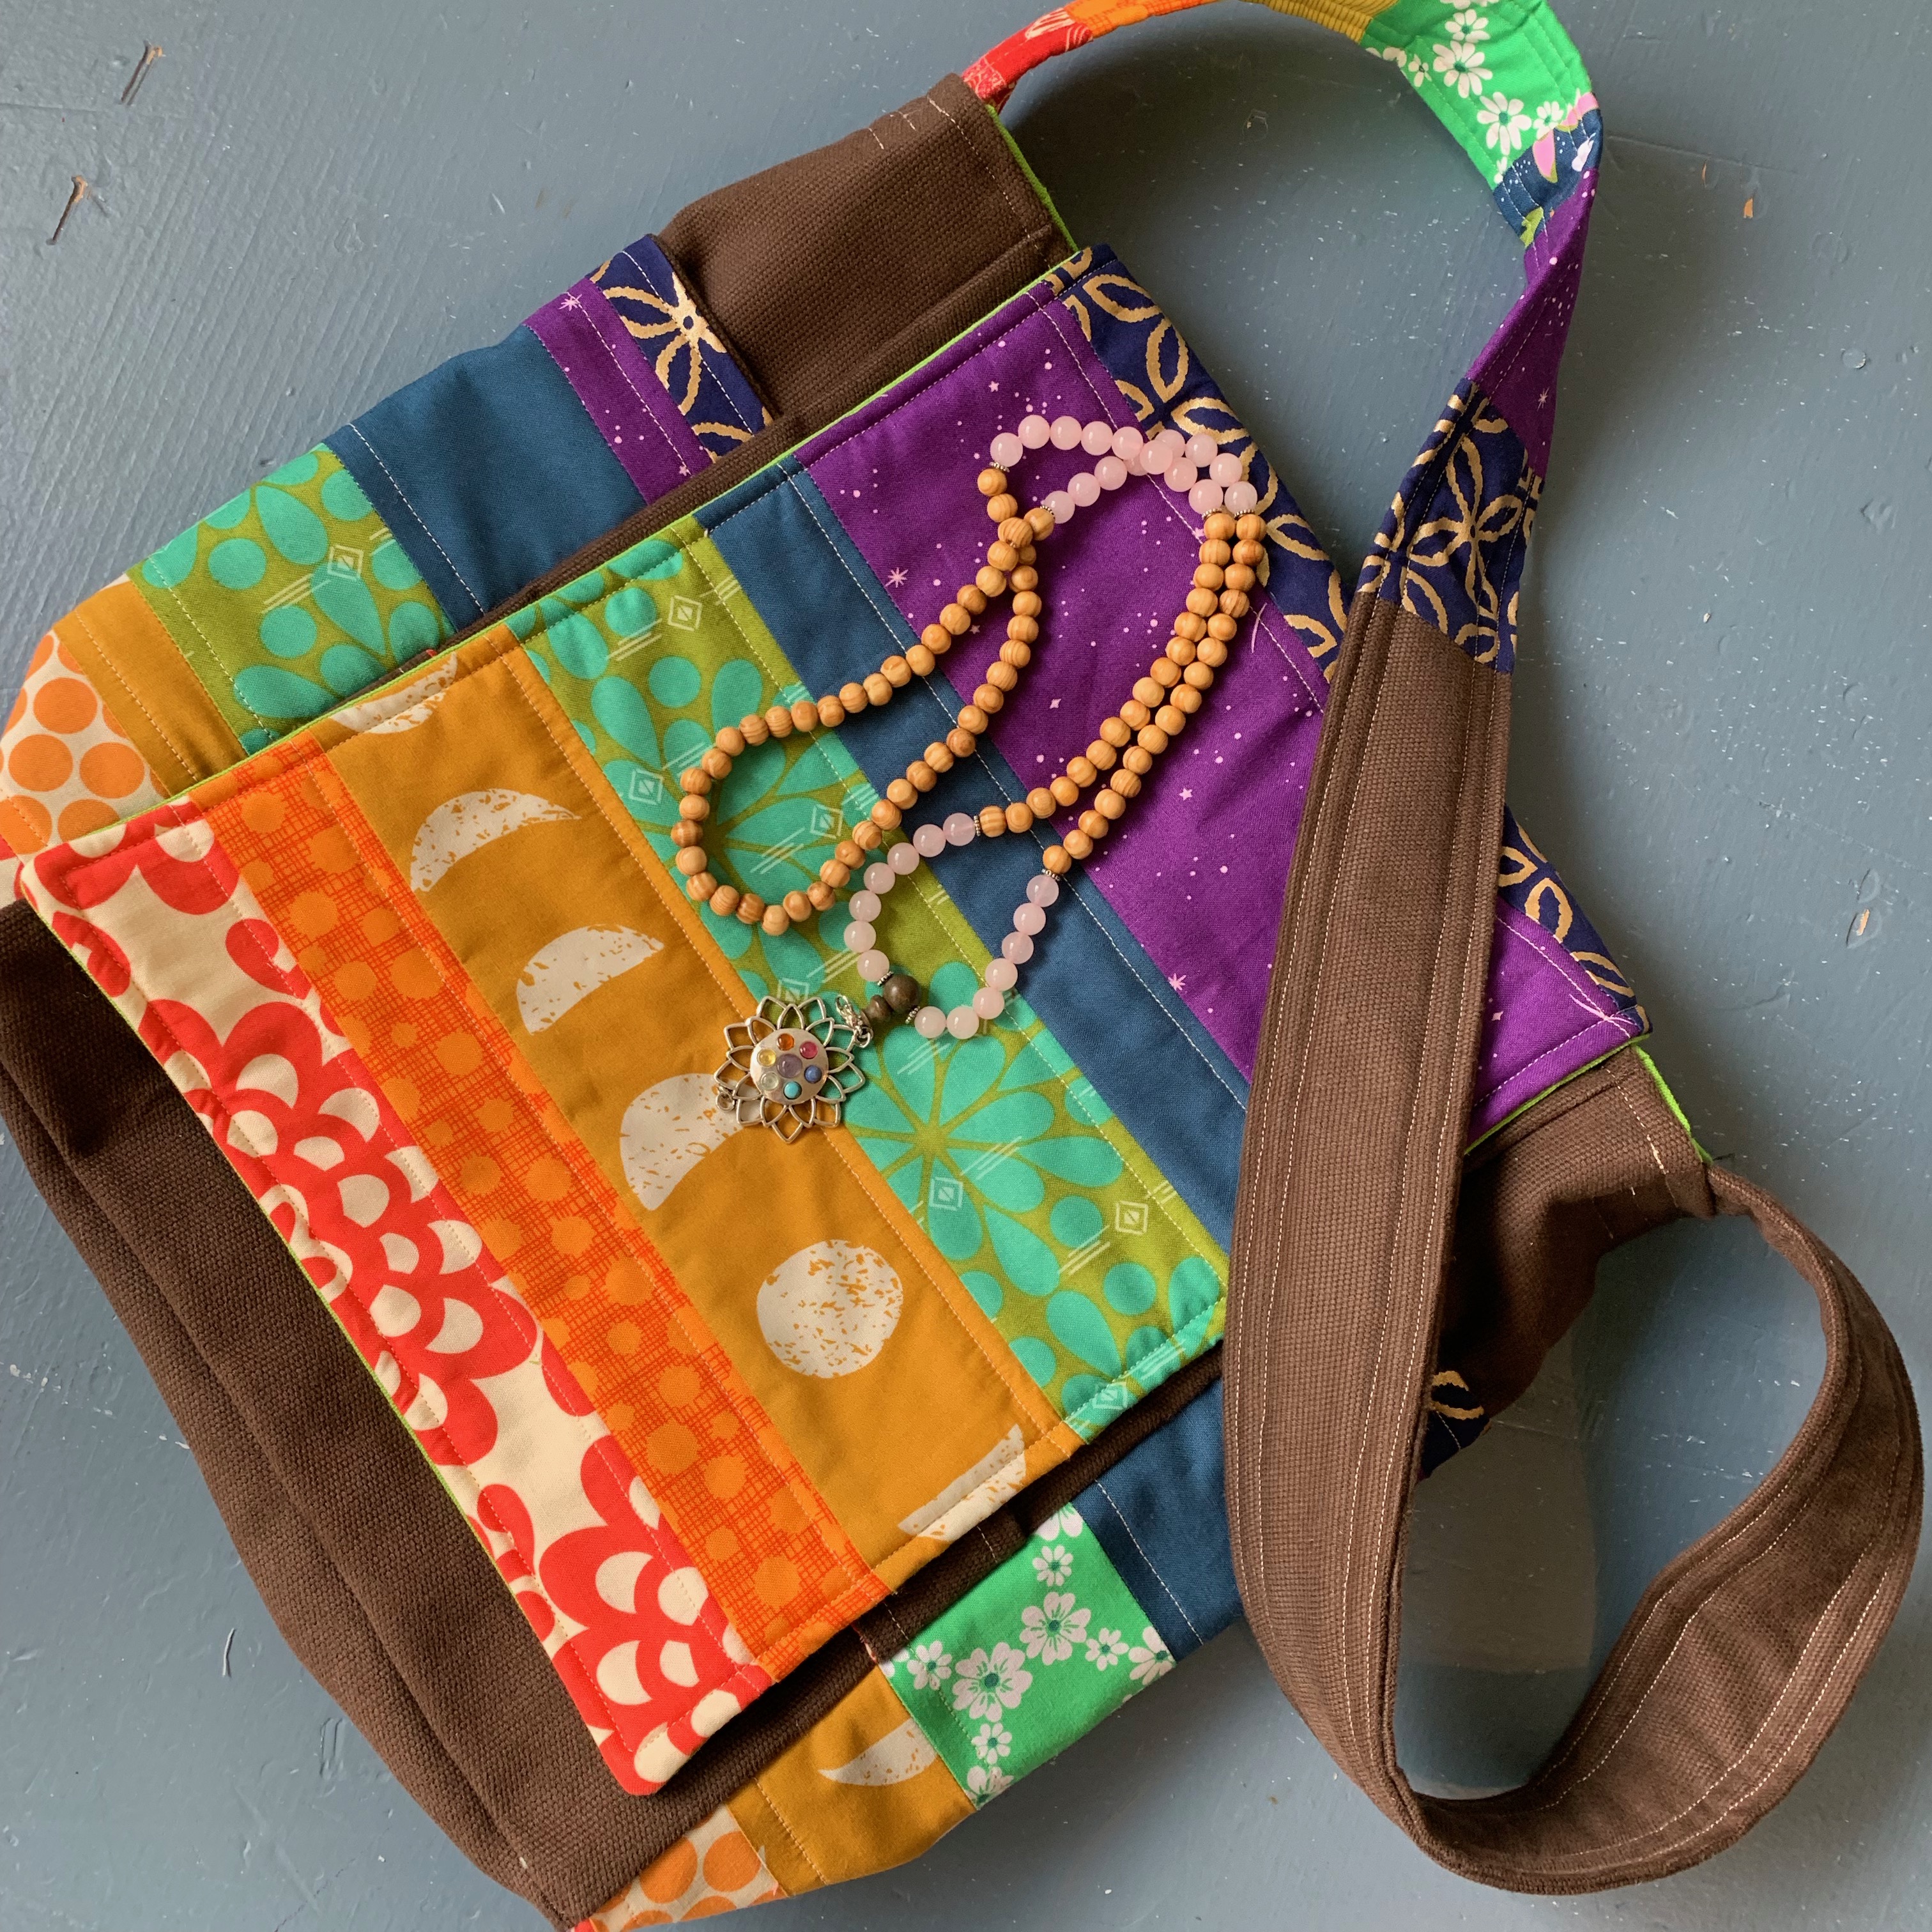 7 Chakra Inspired Messenger Bag Tutorial and Pattern